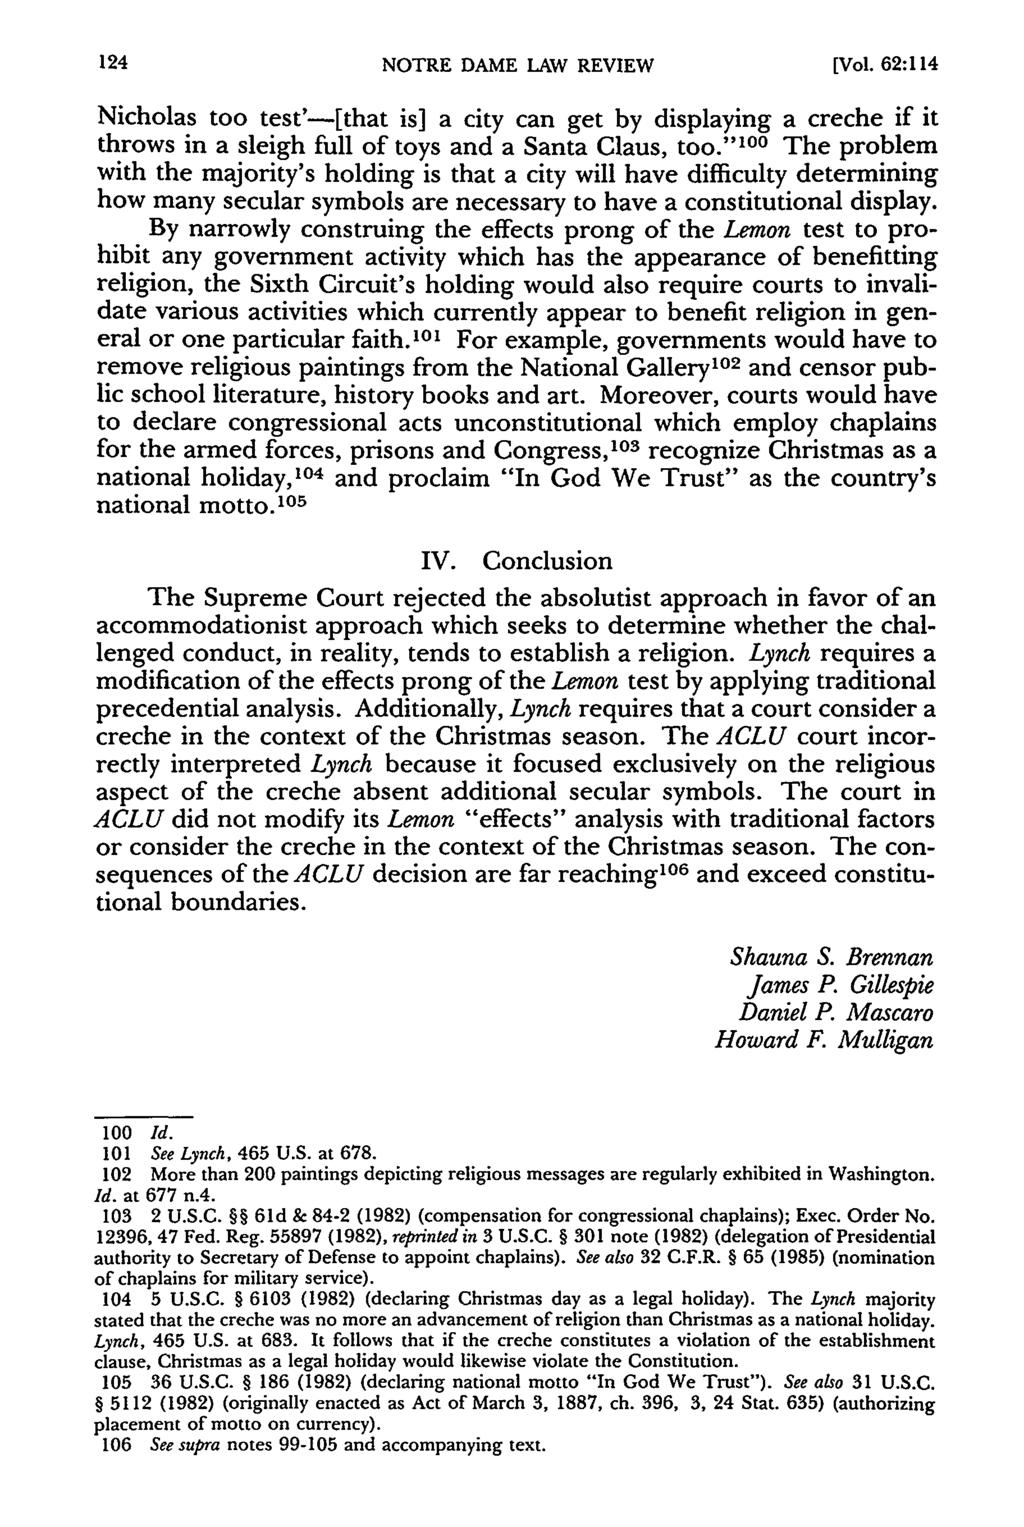 NOTRE DAME LAW REVIEW [Vol. 62:114 Nicholas too test'-[that is] a city can get by displaying a creche if it throws in a sleigh full of toys and a Santa Claus, too.